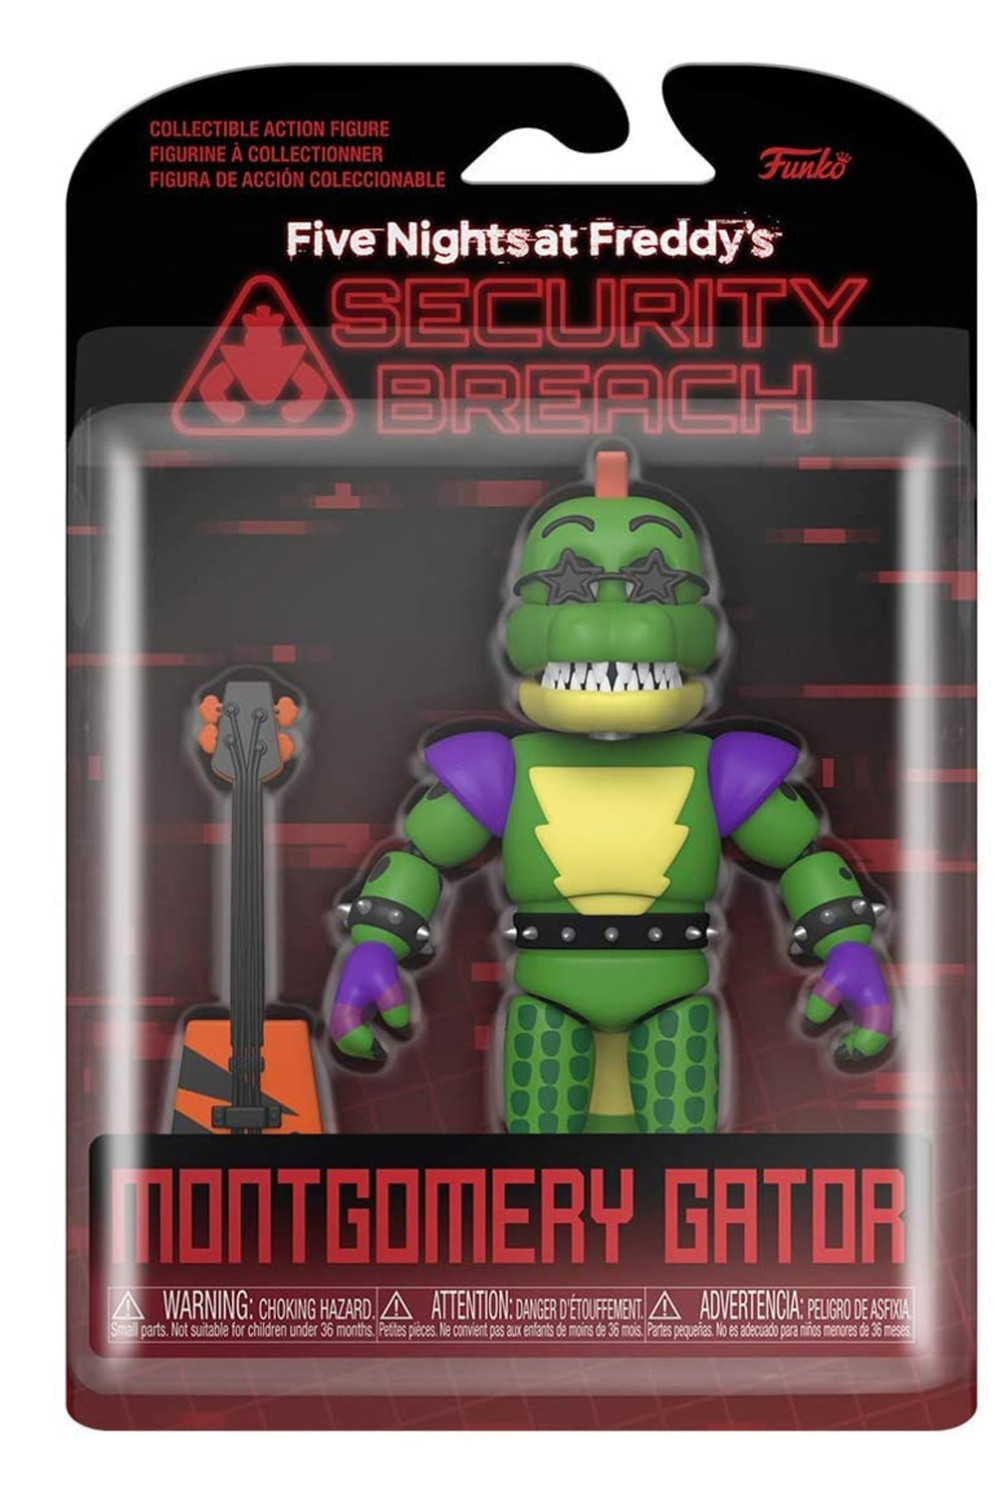  Funko Action Figure: Five Nights At Freddys Security Breach  Montgomery Gator